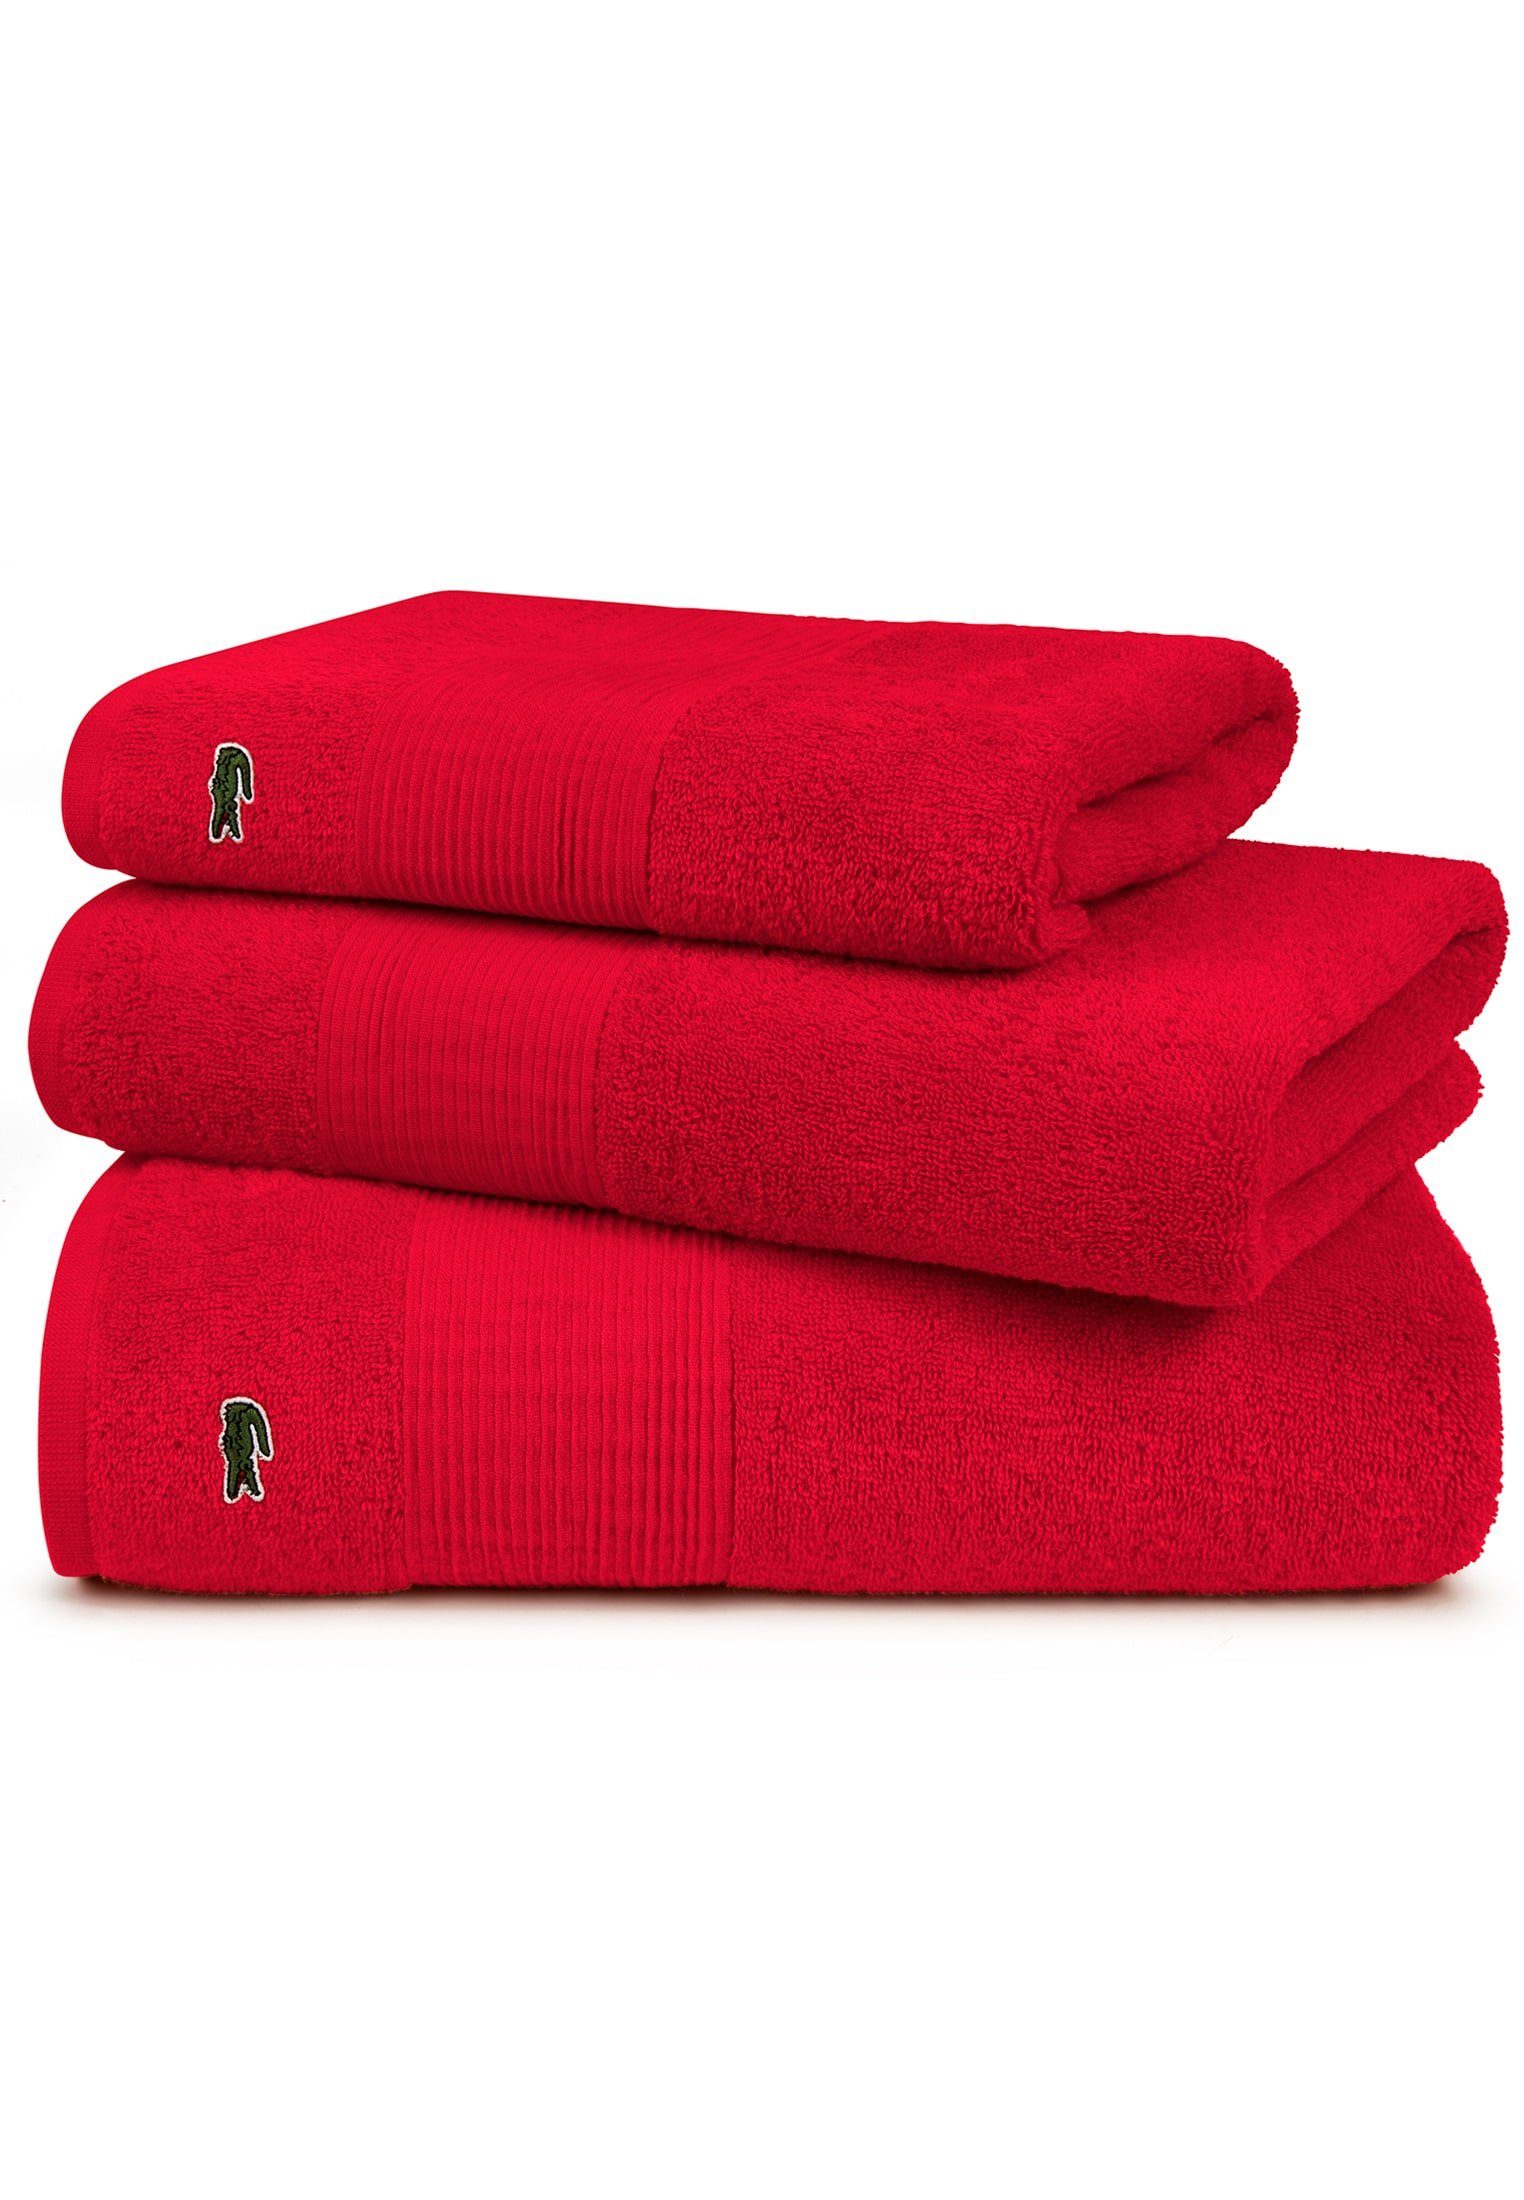 ROUGE CROCO, Badetuch 100% LE Baumwolle Lacoste L